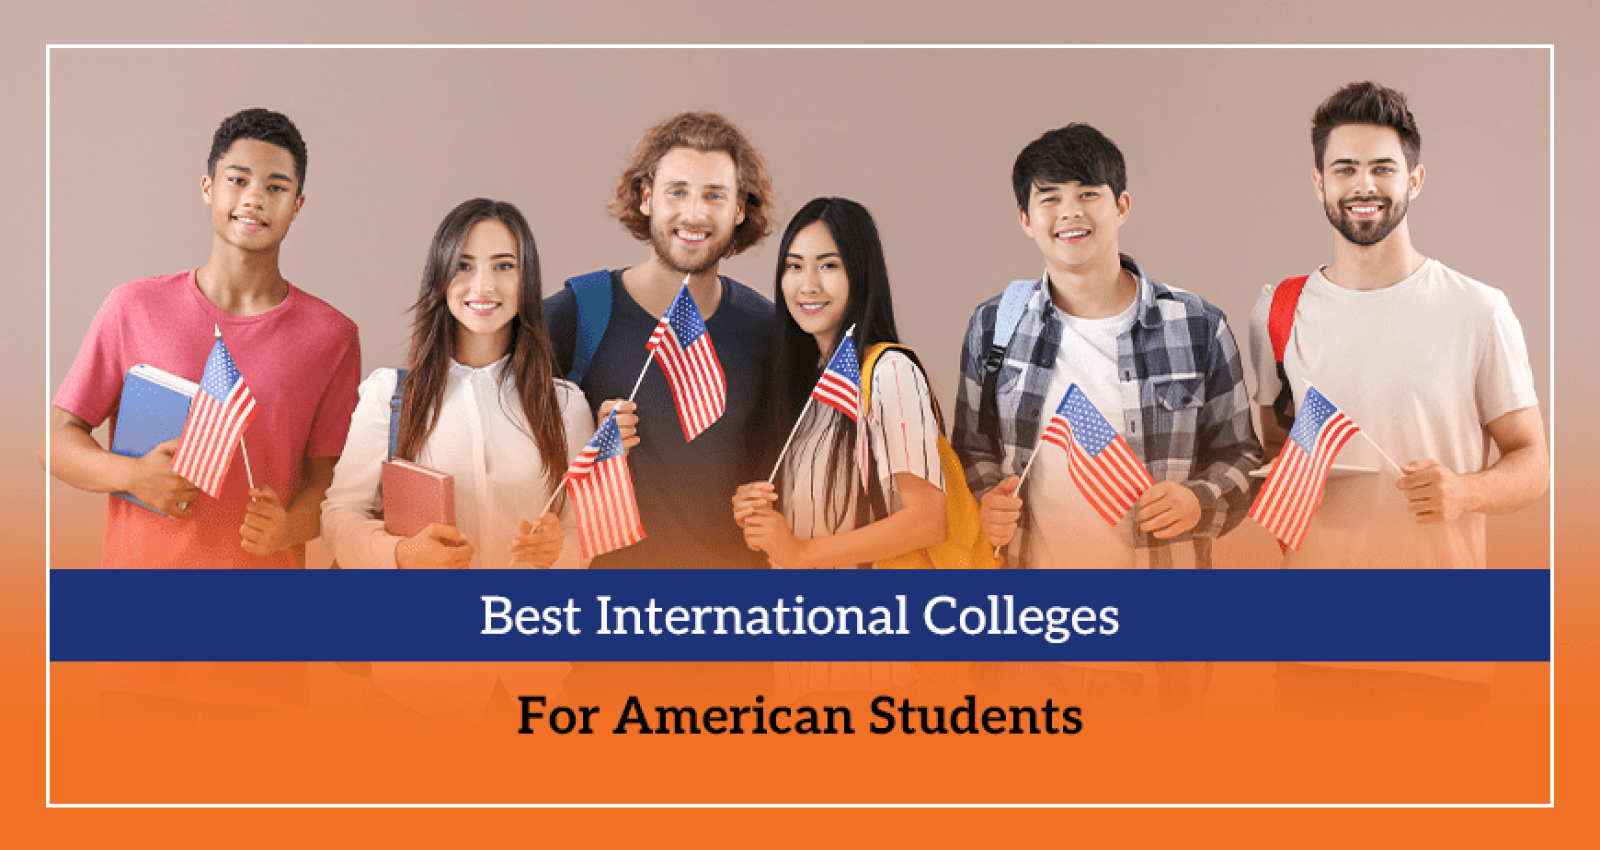 Best International Colleges For American Students